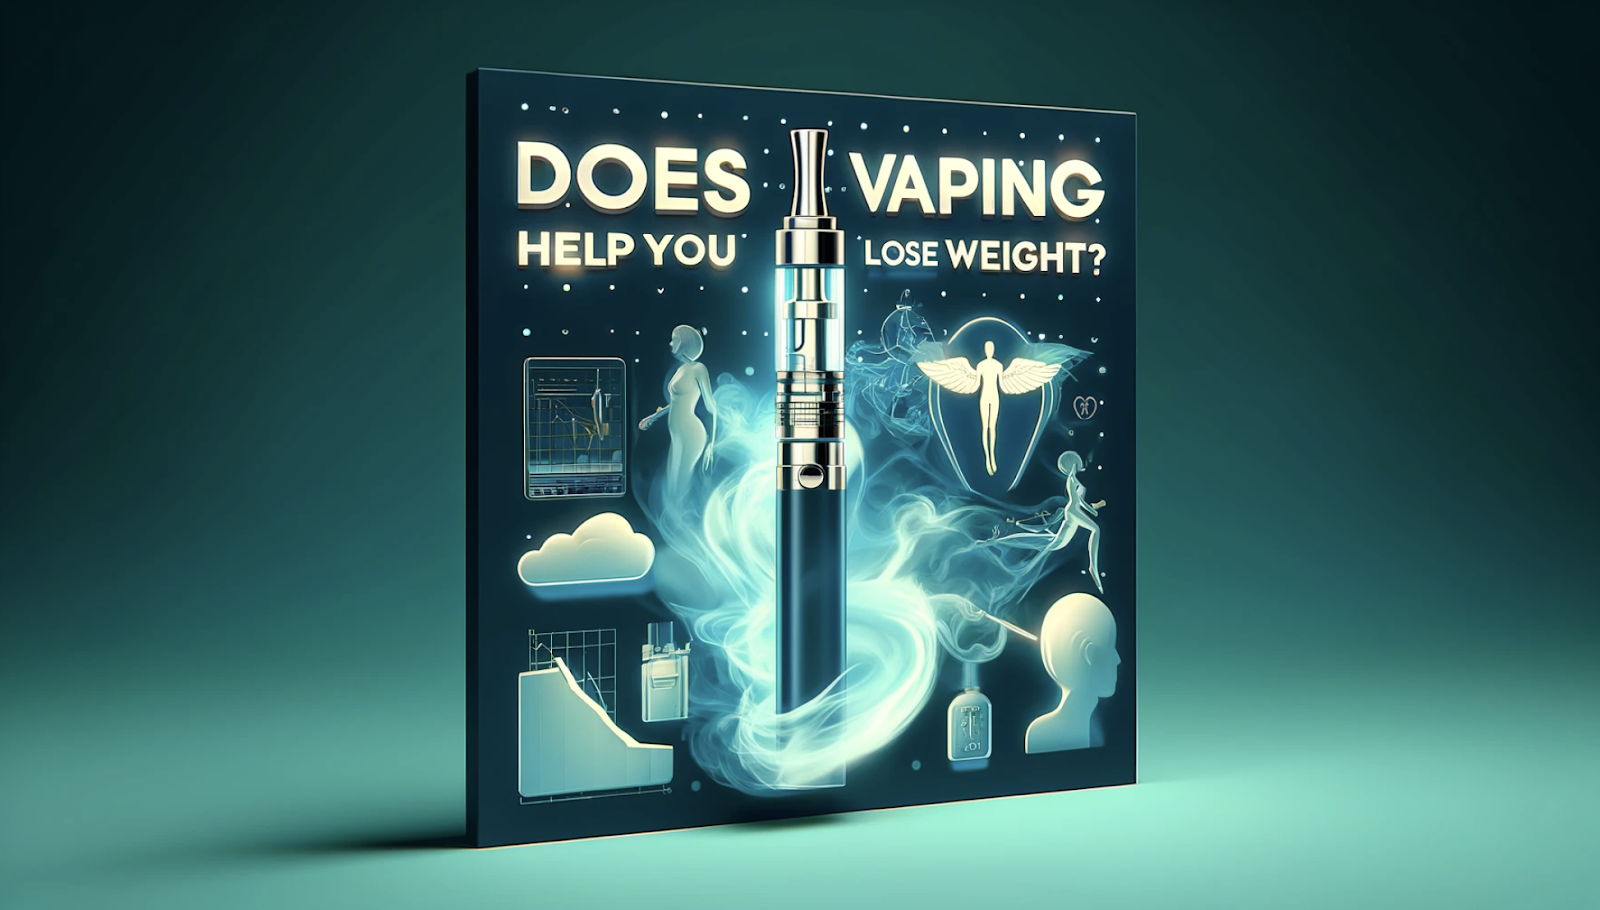 In the world of weight loss, countless fads and trends have come and gone, promising quick and easy results. One of the more recent claims to emerge is that vaping